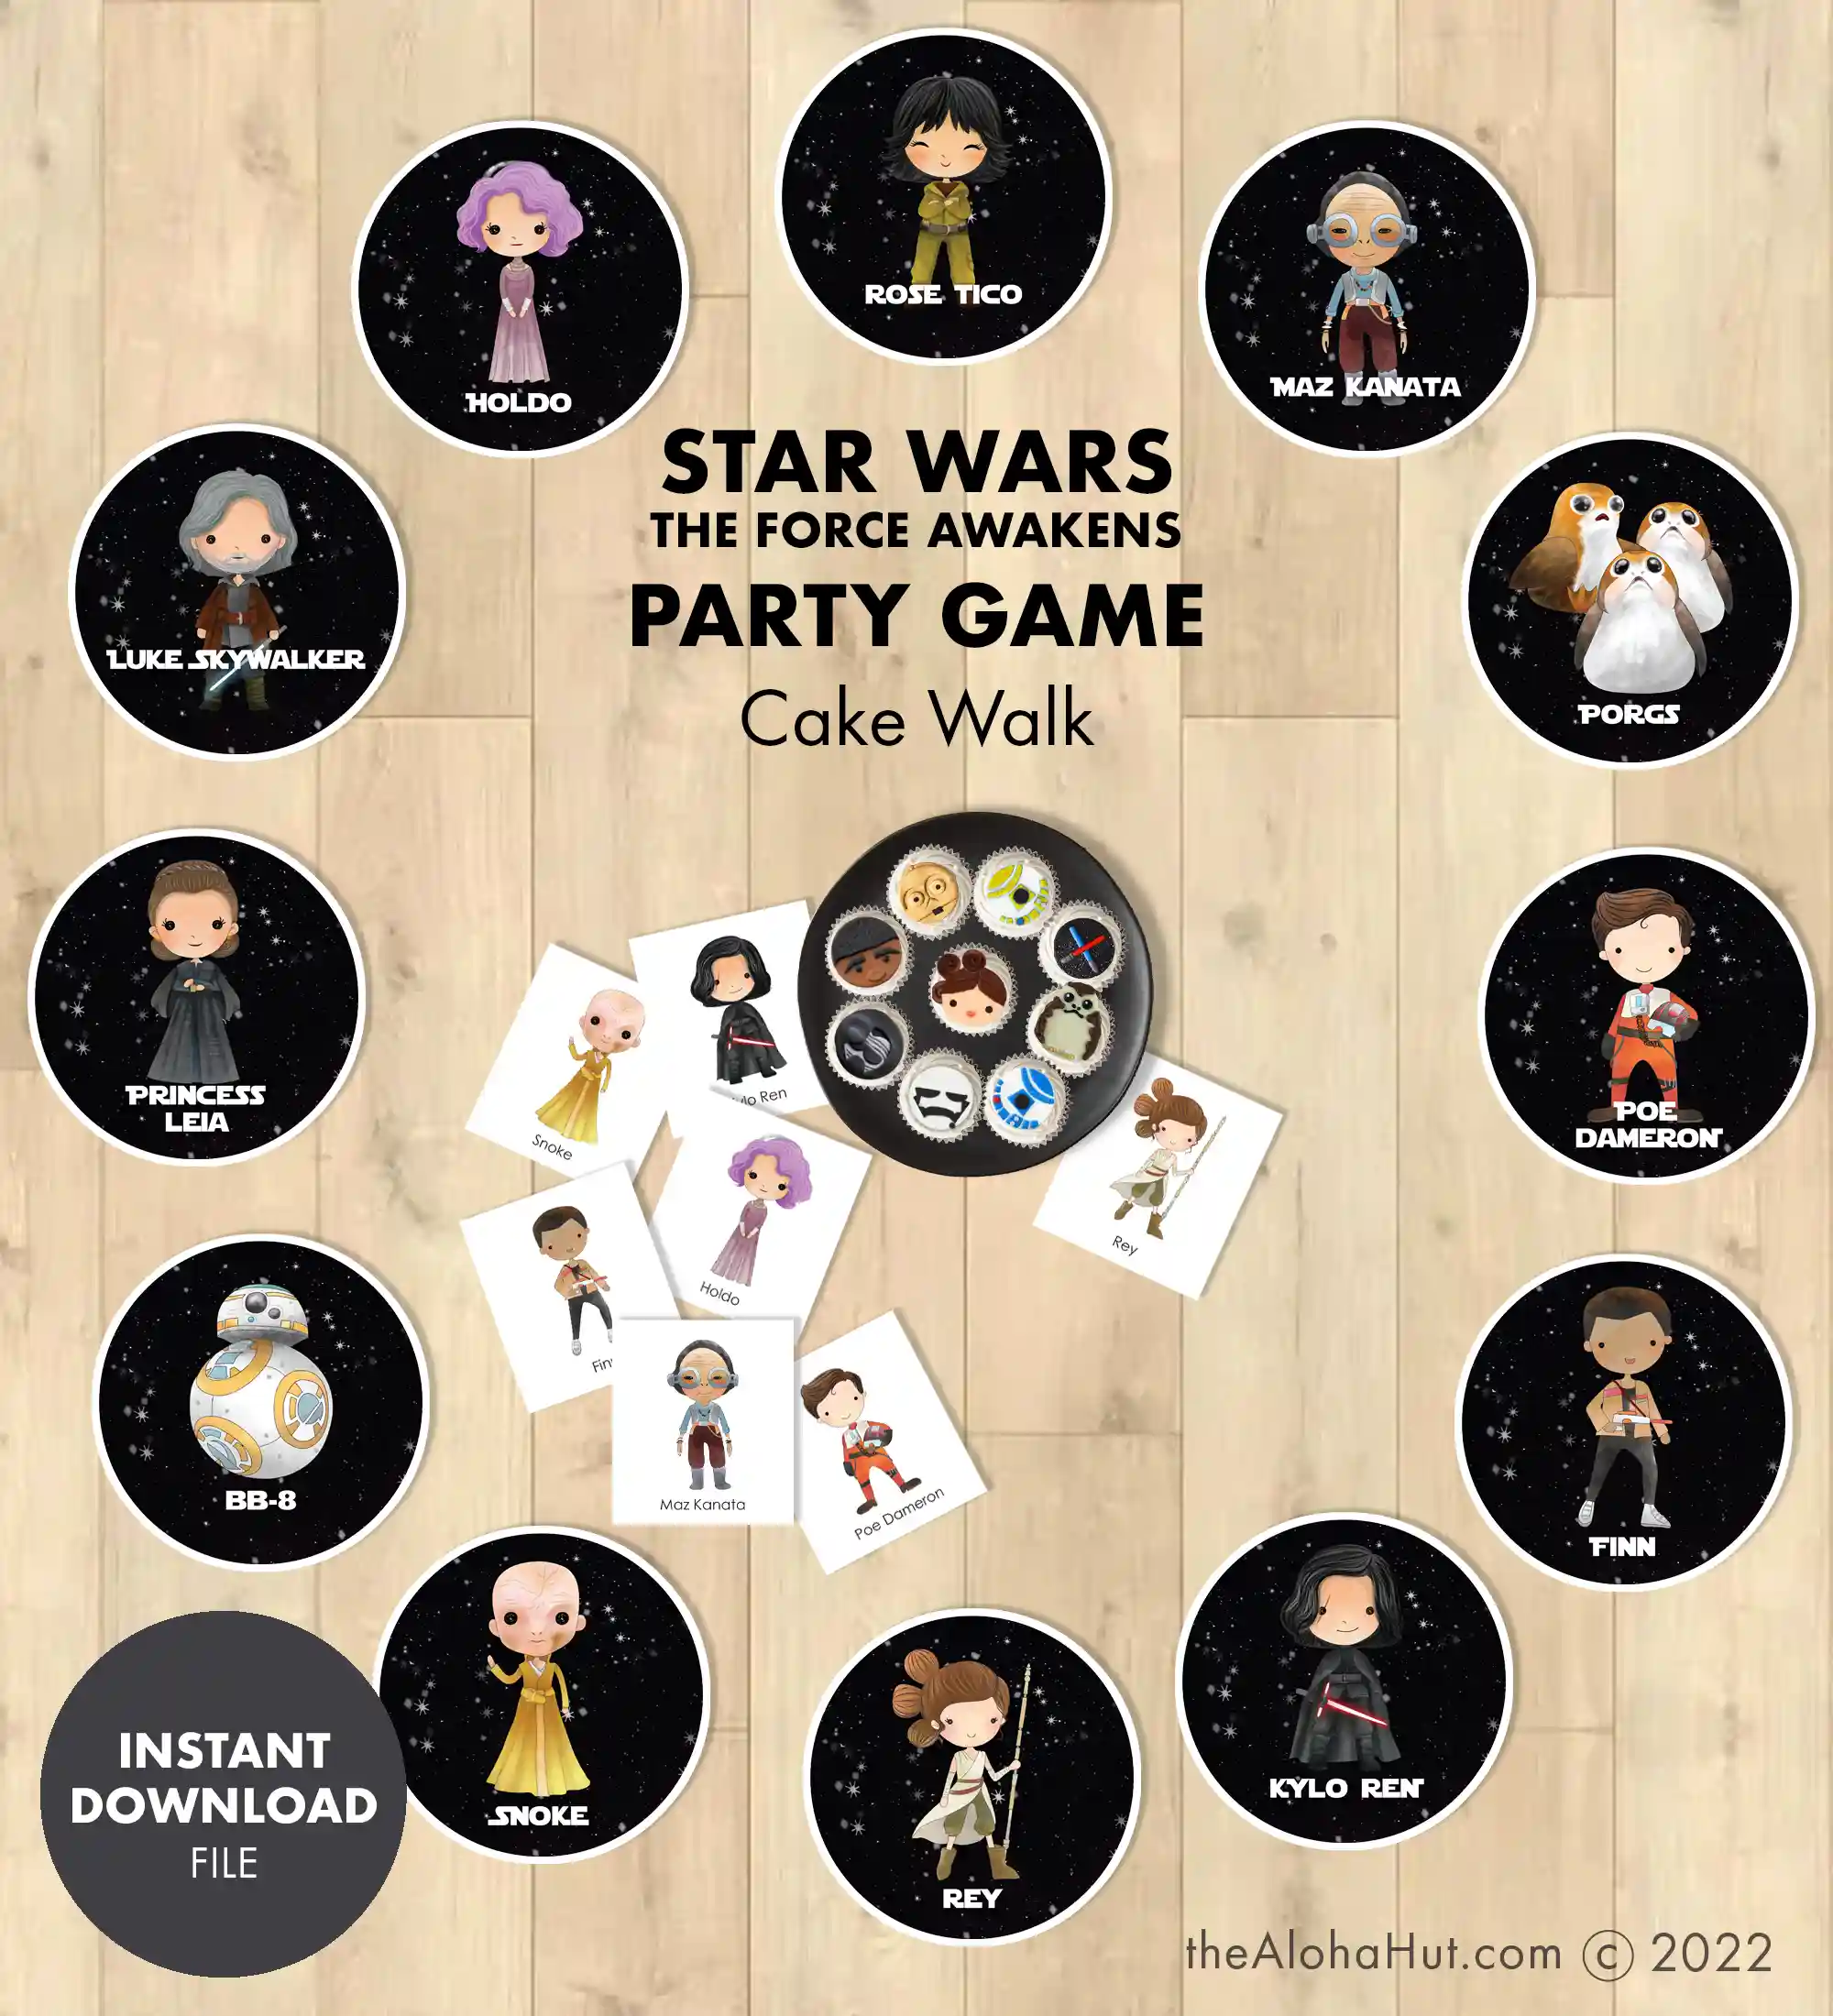 Star Wars party ideas, activities, birthday party games, decorations, and prints. Ideas and tips and tricks for throwing the best Star Wars themed kids birthday party, baby shower, or one with the force celebration. Includes Star Wars printable games, decorations (cupcake toppers, banners, gift tags, characters) and Star Wars party games (BINGO, scavenger hunt, pin the lightsaber on Yoda or Darth Vader). Cupcake walk and cake walk game.